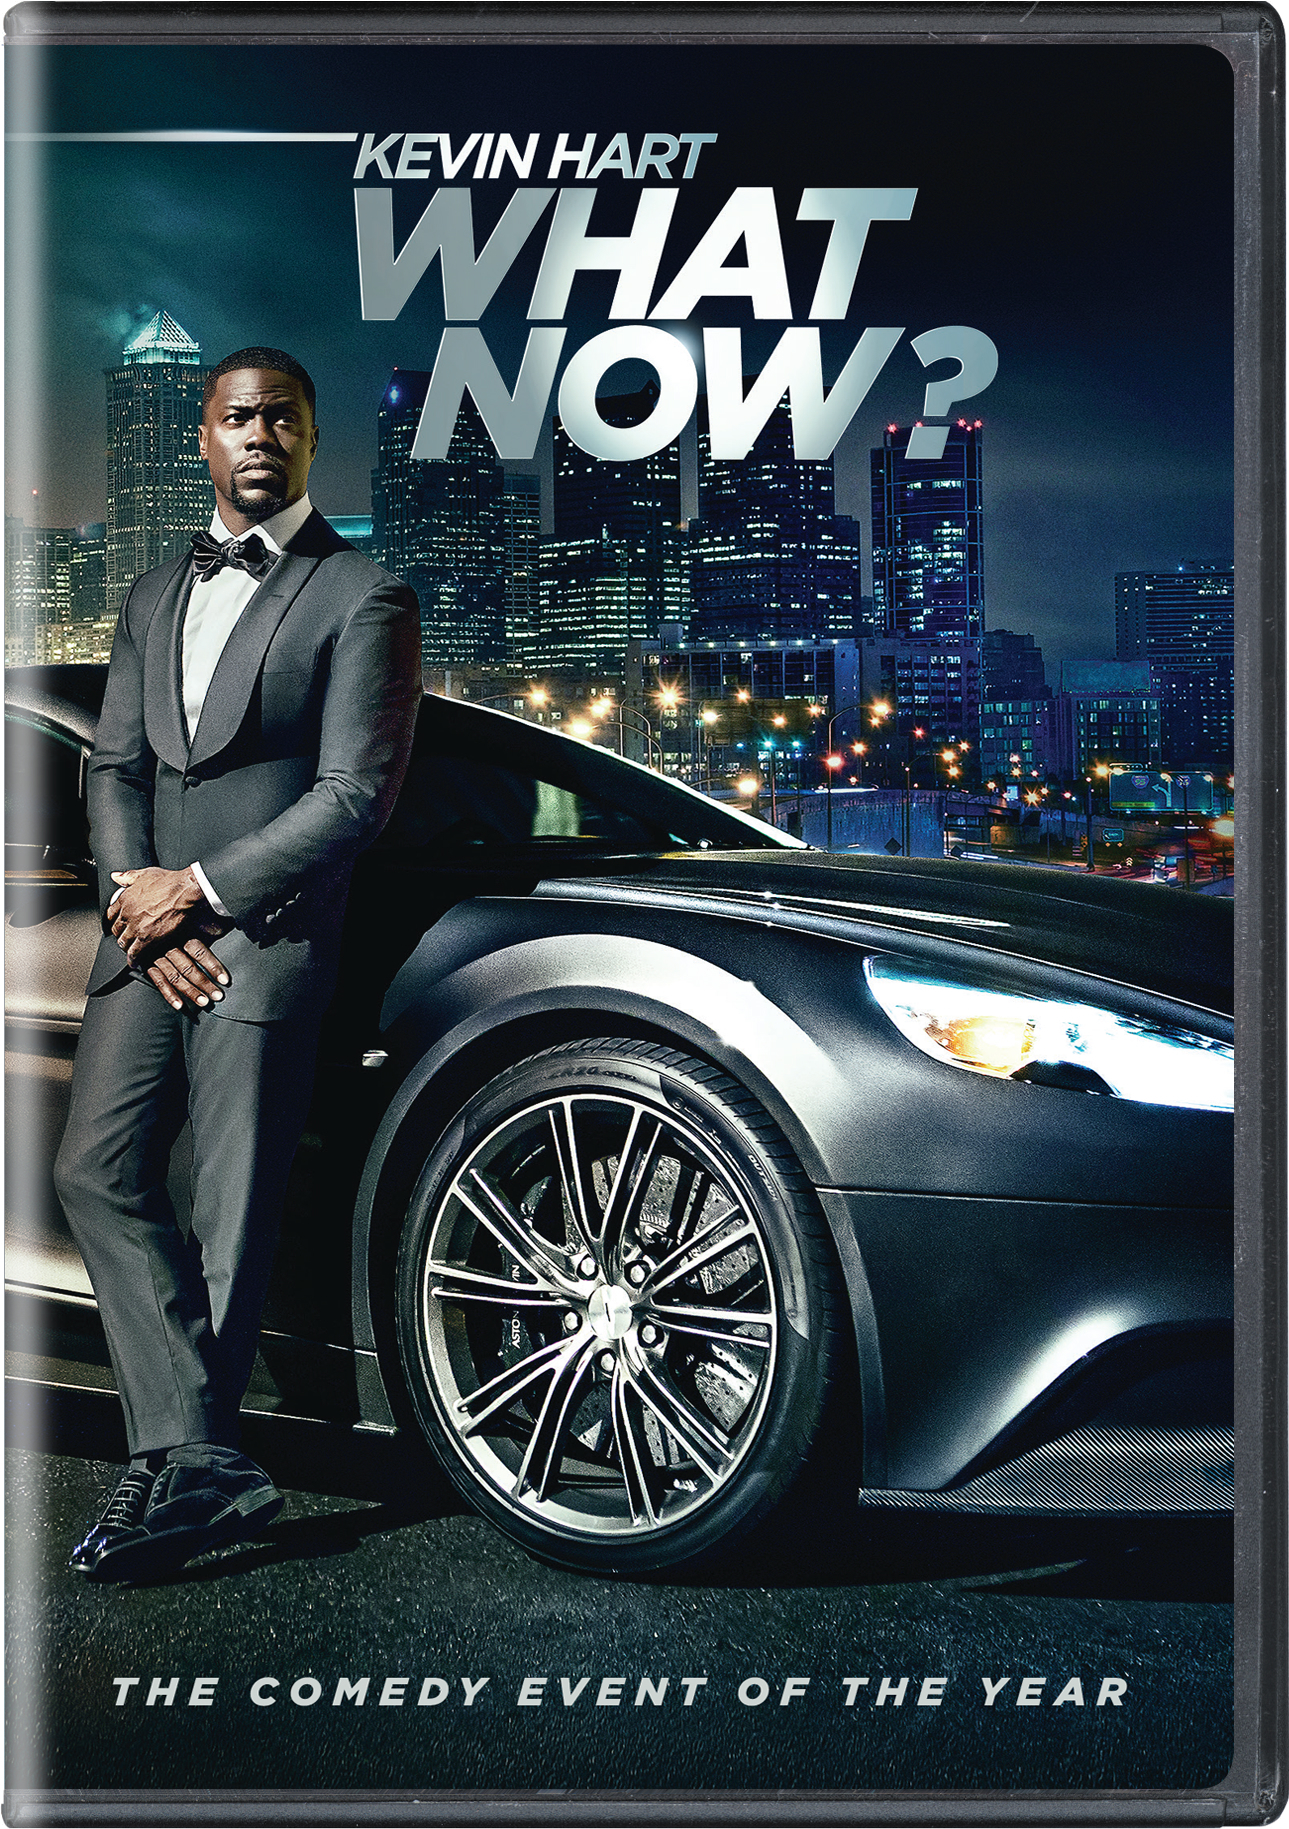 Kevin Hart - What Now? - DVD [ 2016 ]  - Stand Up Movies On DVD - Movies On GRUV